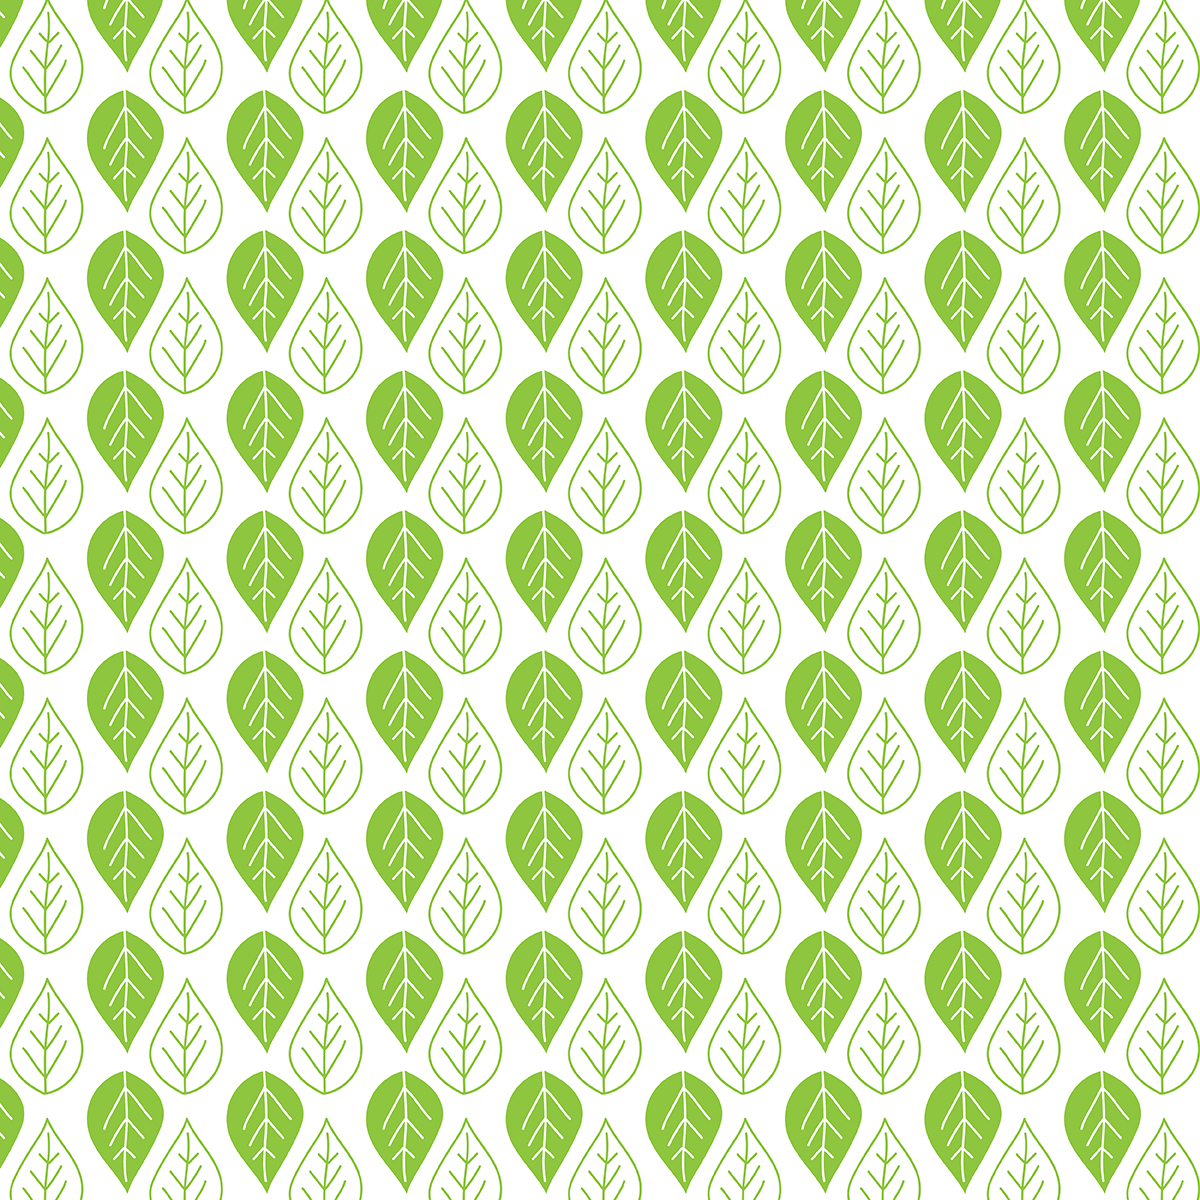 Wallpapers leaves pattern textures on the desktop